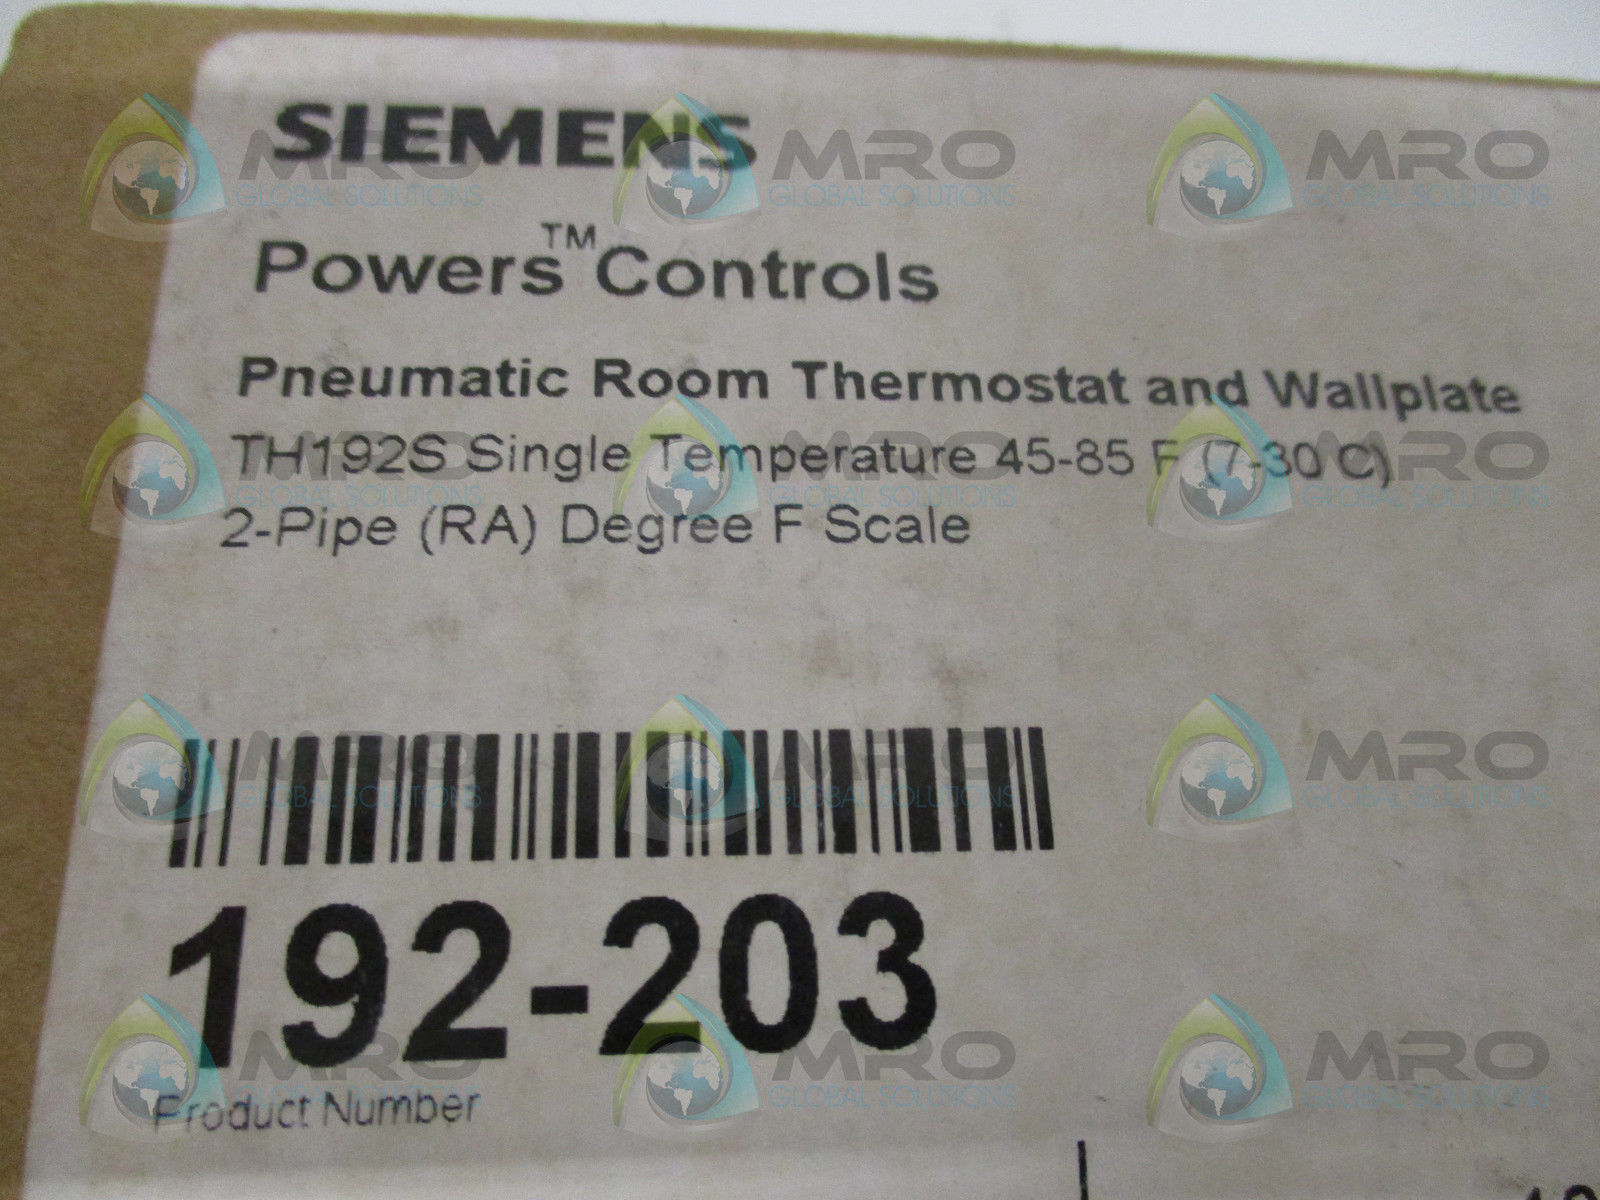 SIEMENS POWERS 192-203 PNEUMATIC ROOM THERMOSTAT AND WALLPLA